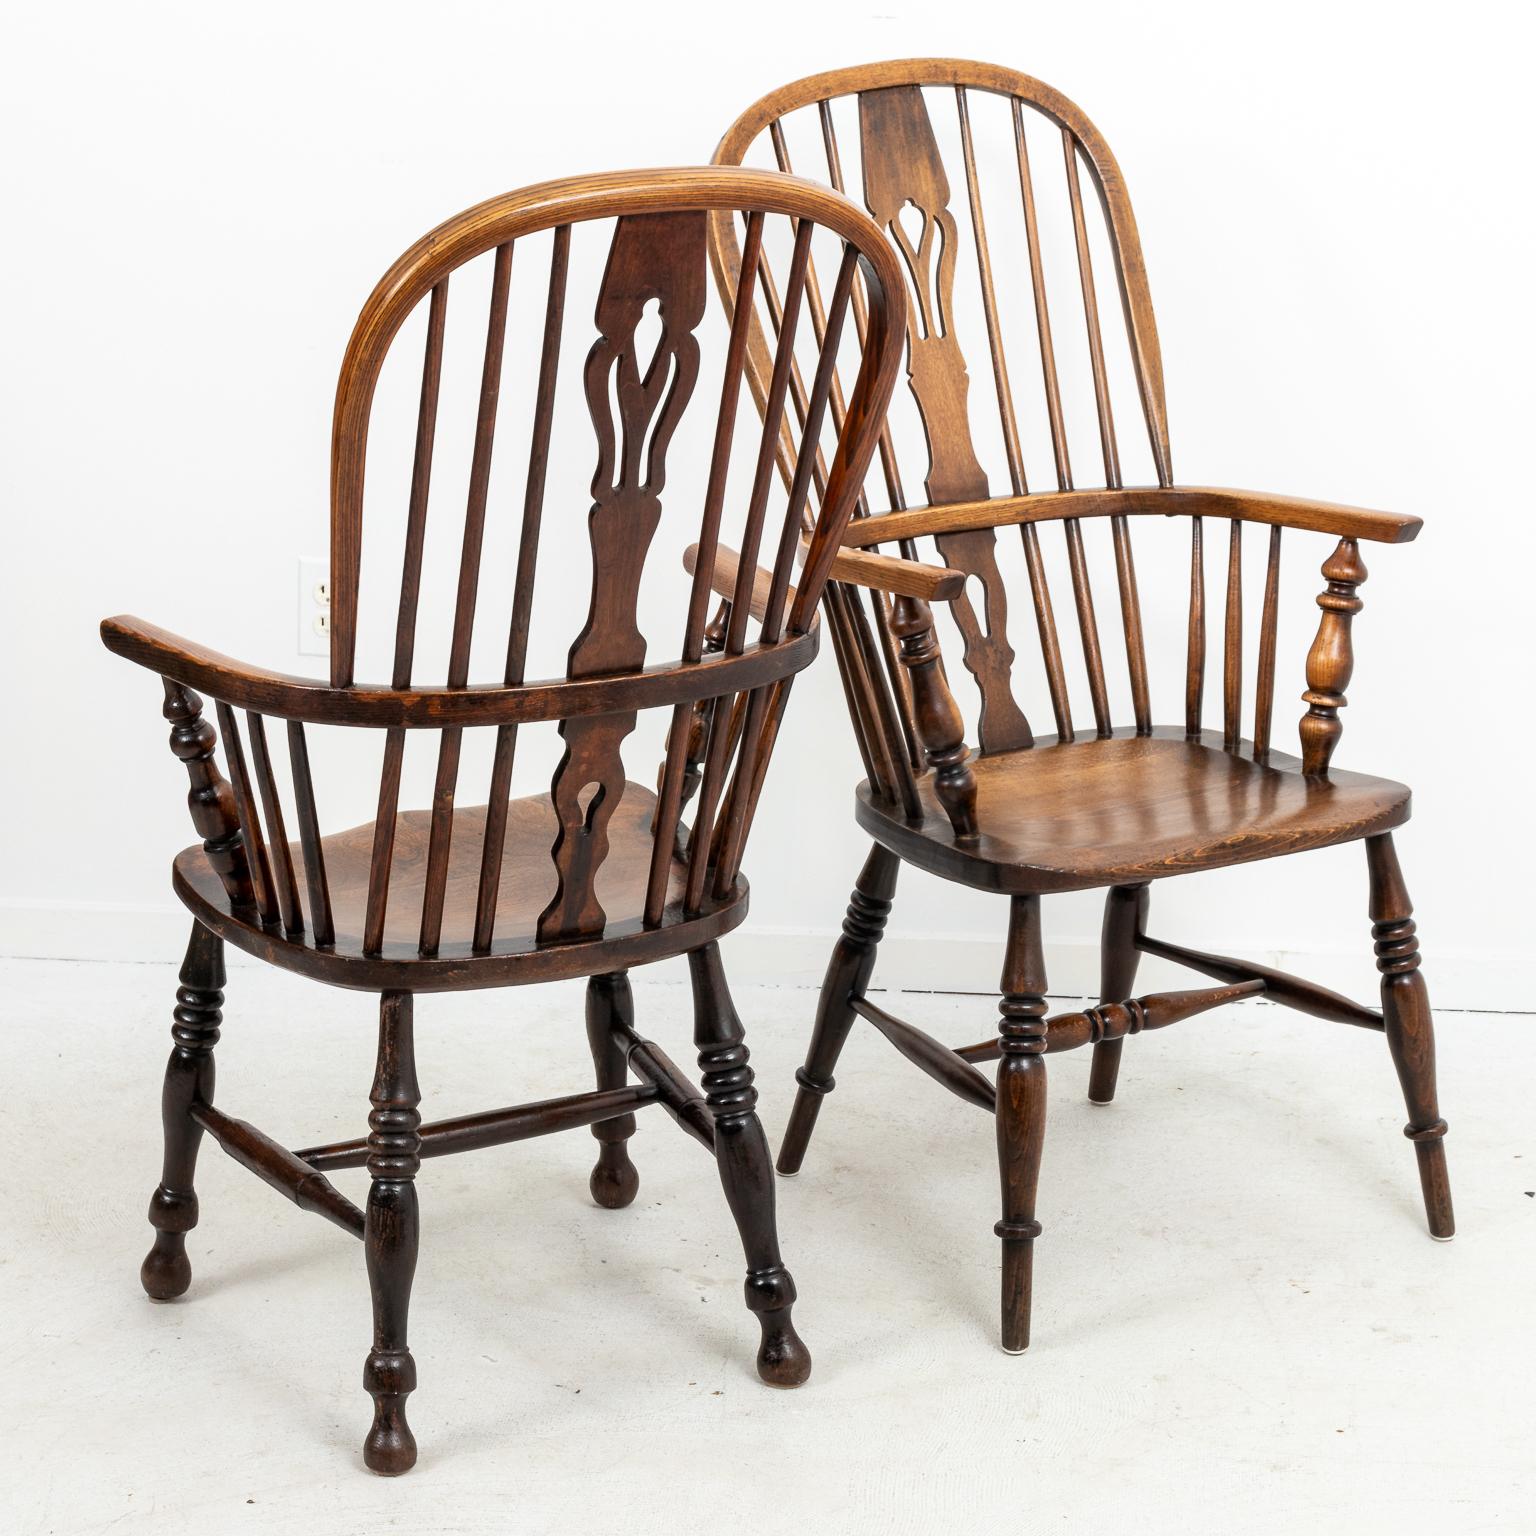 Set of four antique oakwood Windsor style armchairs with comb backs. Please note of wear consistent with age including finish loss.